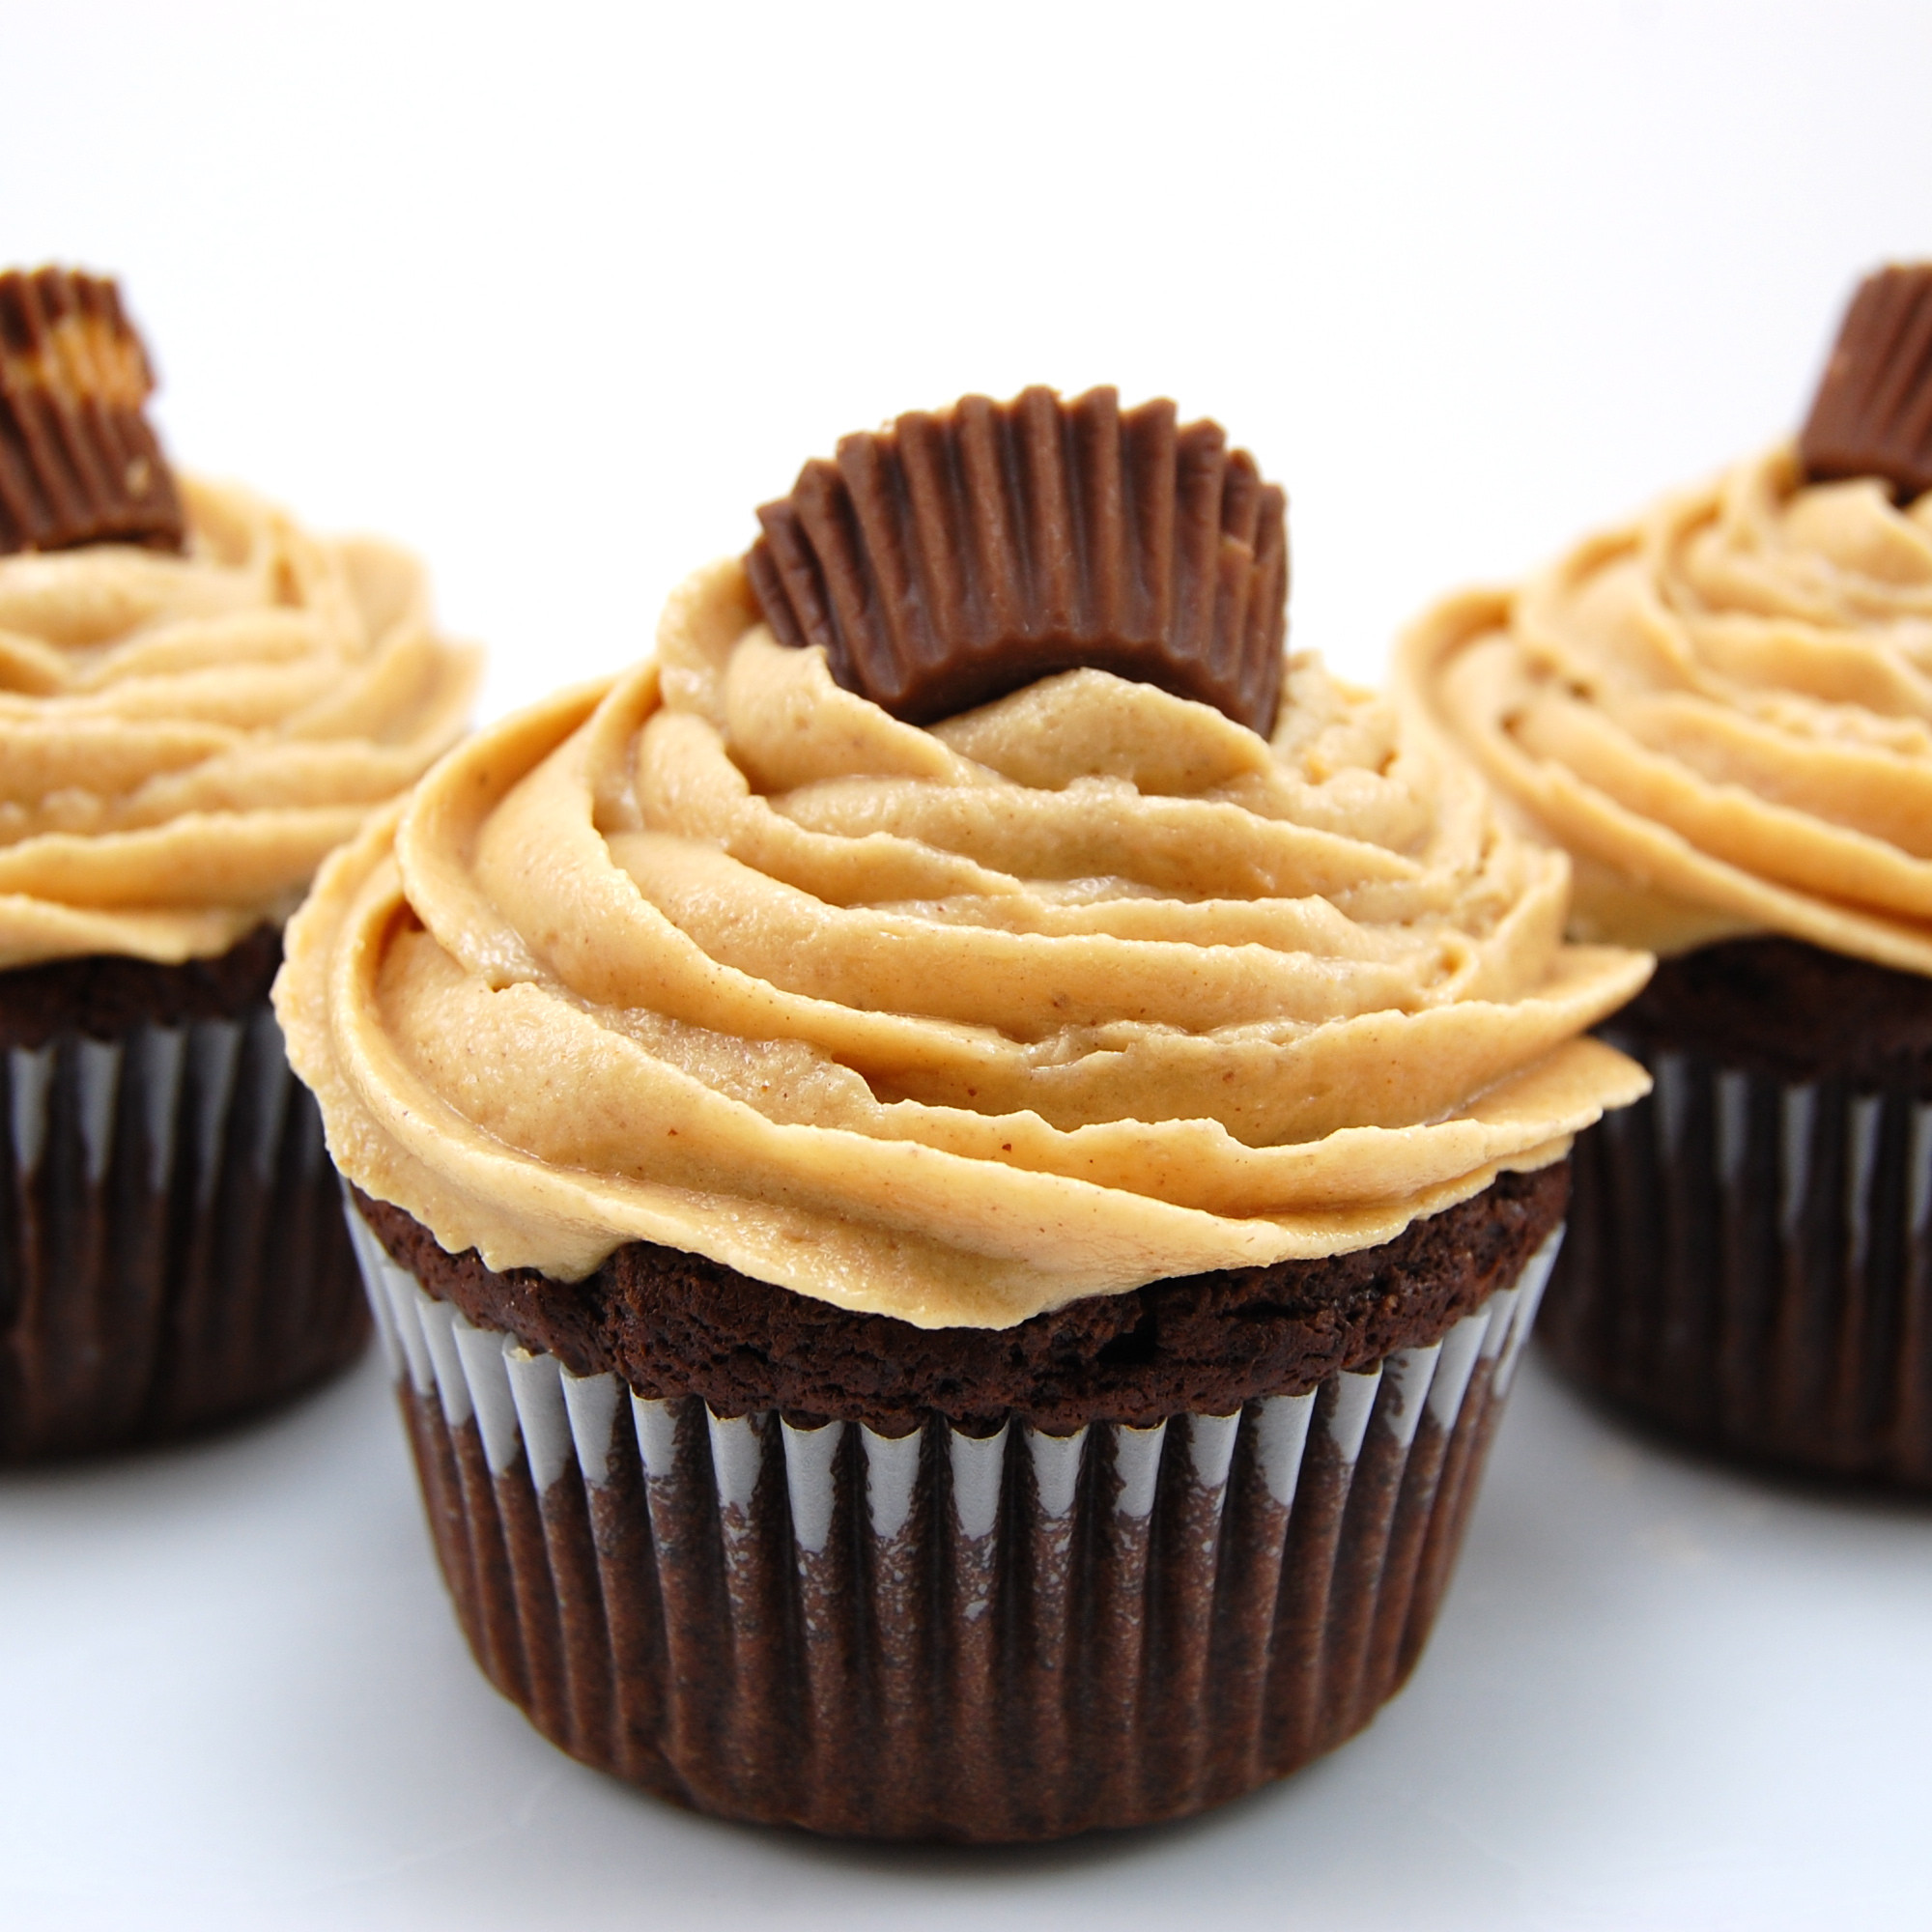 Chocolate Cupcakes With Peanut Butter Frosting
 Chocolate Peanut Butter Cup Cupcakes with Peanut Butter